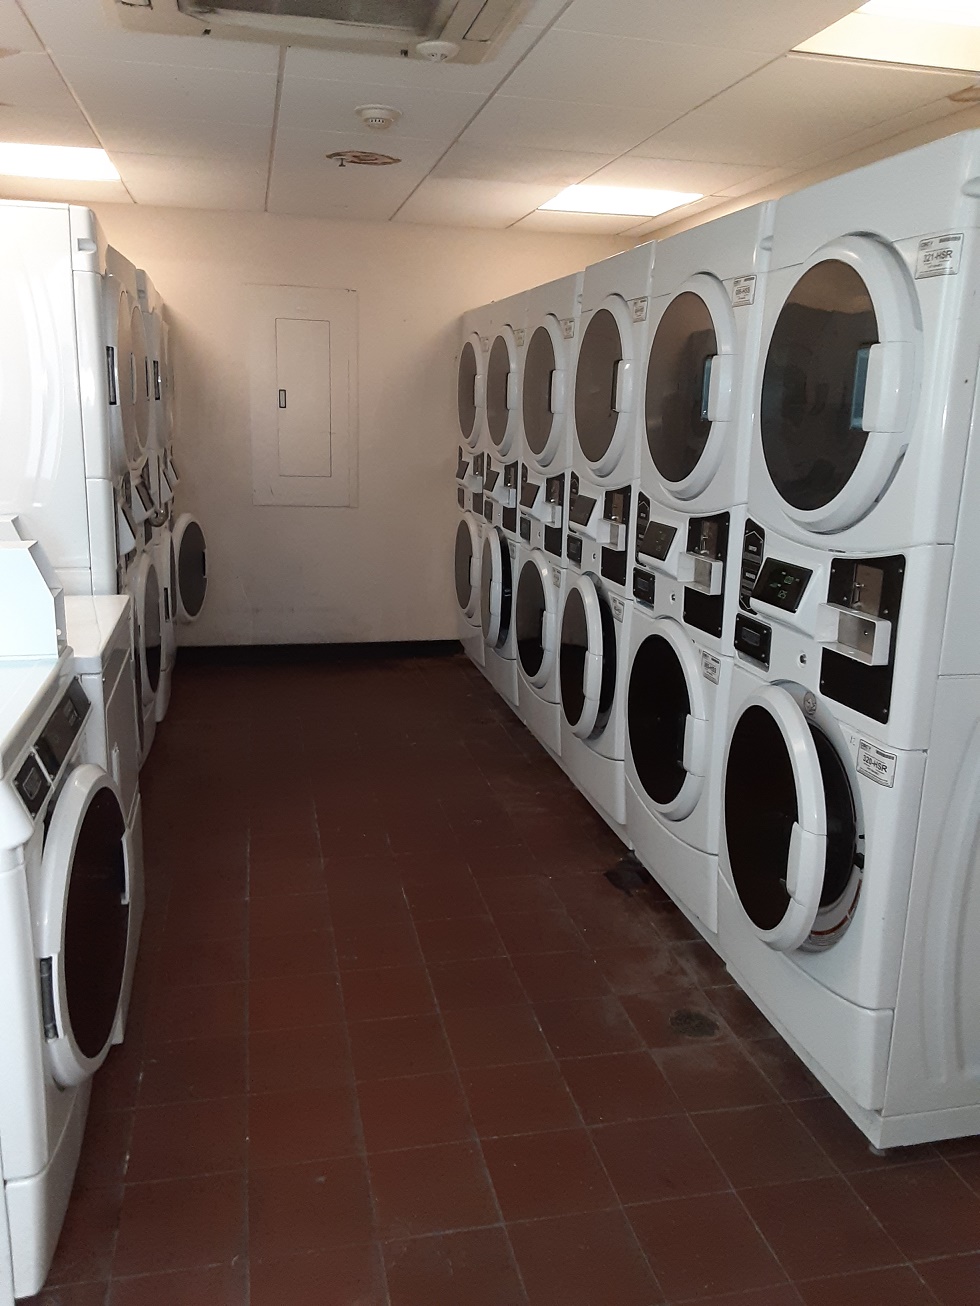 gateway apartments laundry room. large laundry room with stacked machines.